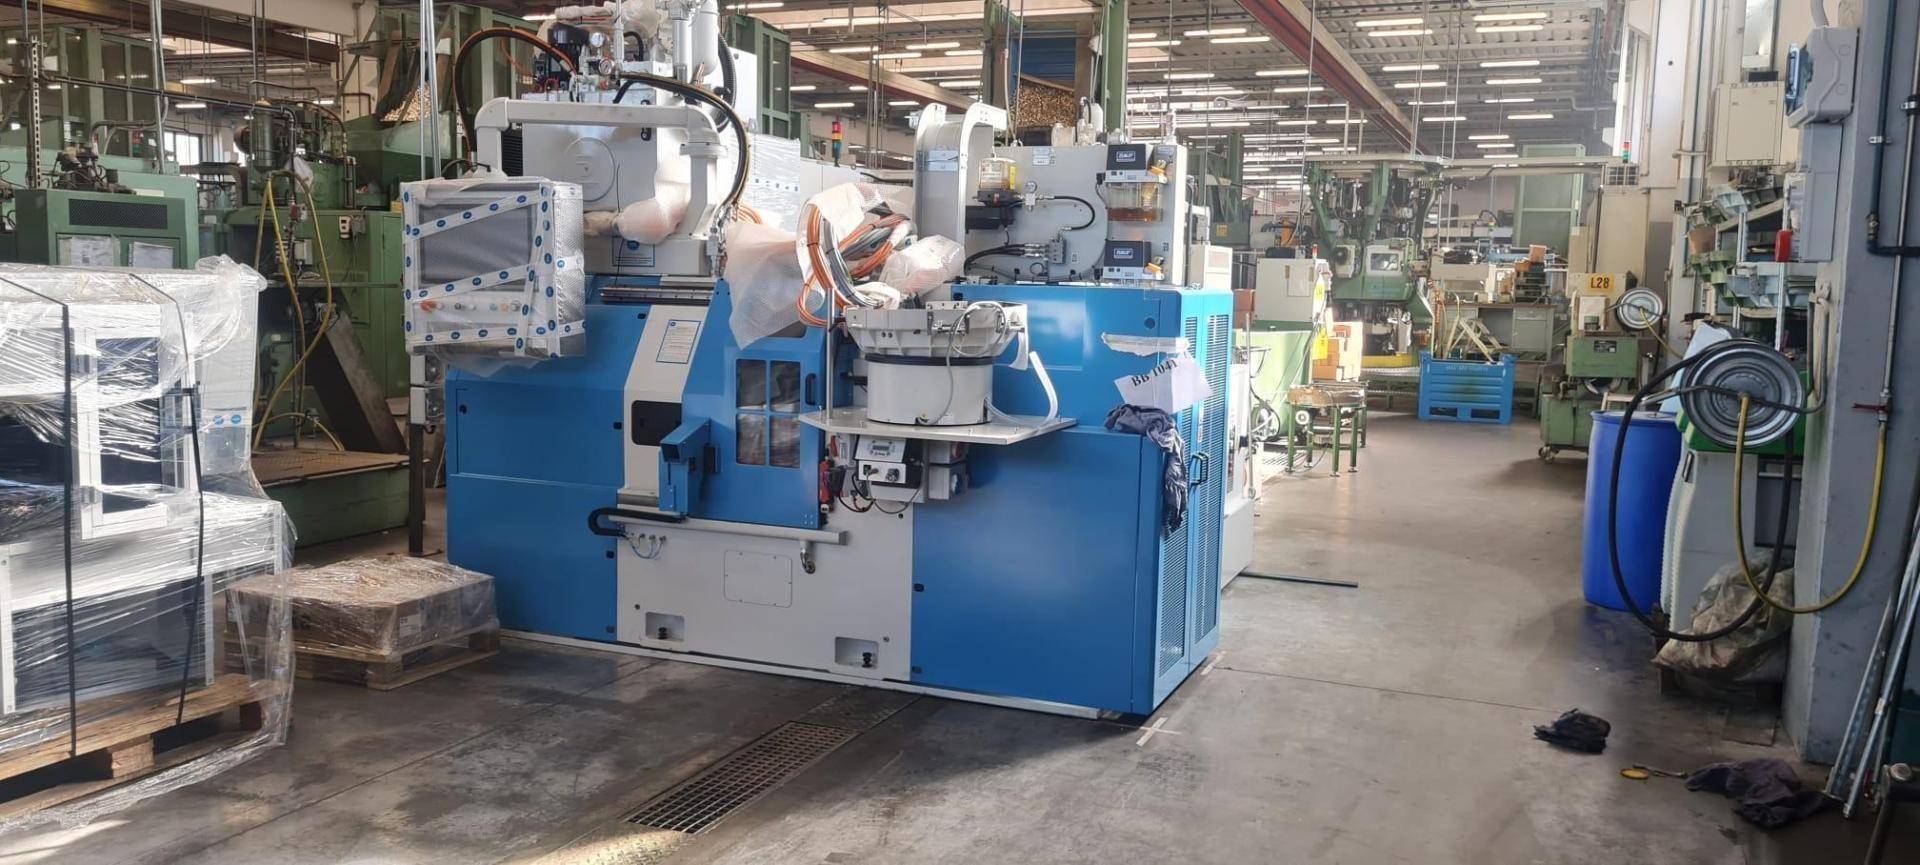 New transfer machinery for production from Era Valerio